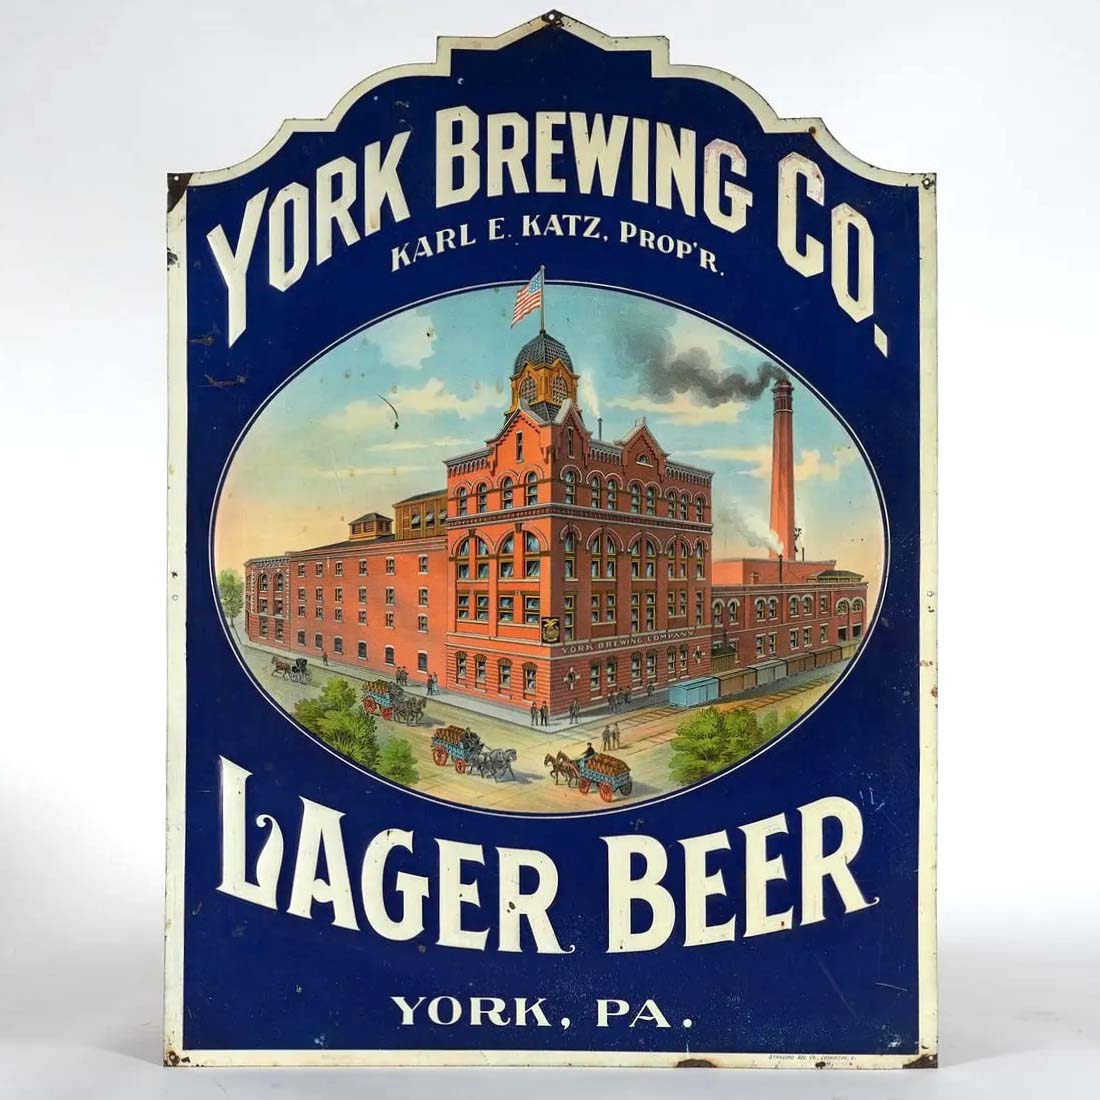 York Brewing Lager Beer sign, which sold for $17,000 ($20,740 with buyer’s premium) at Morean.